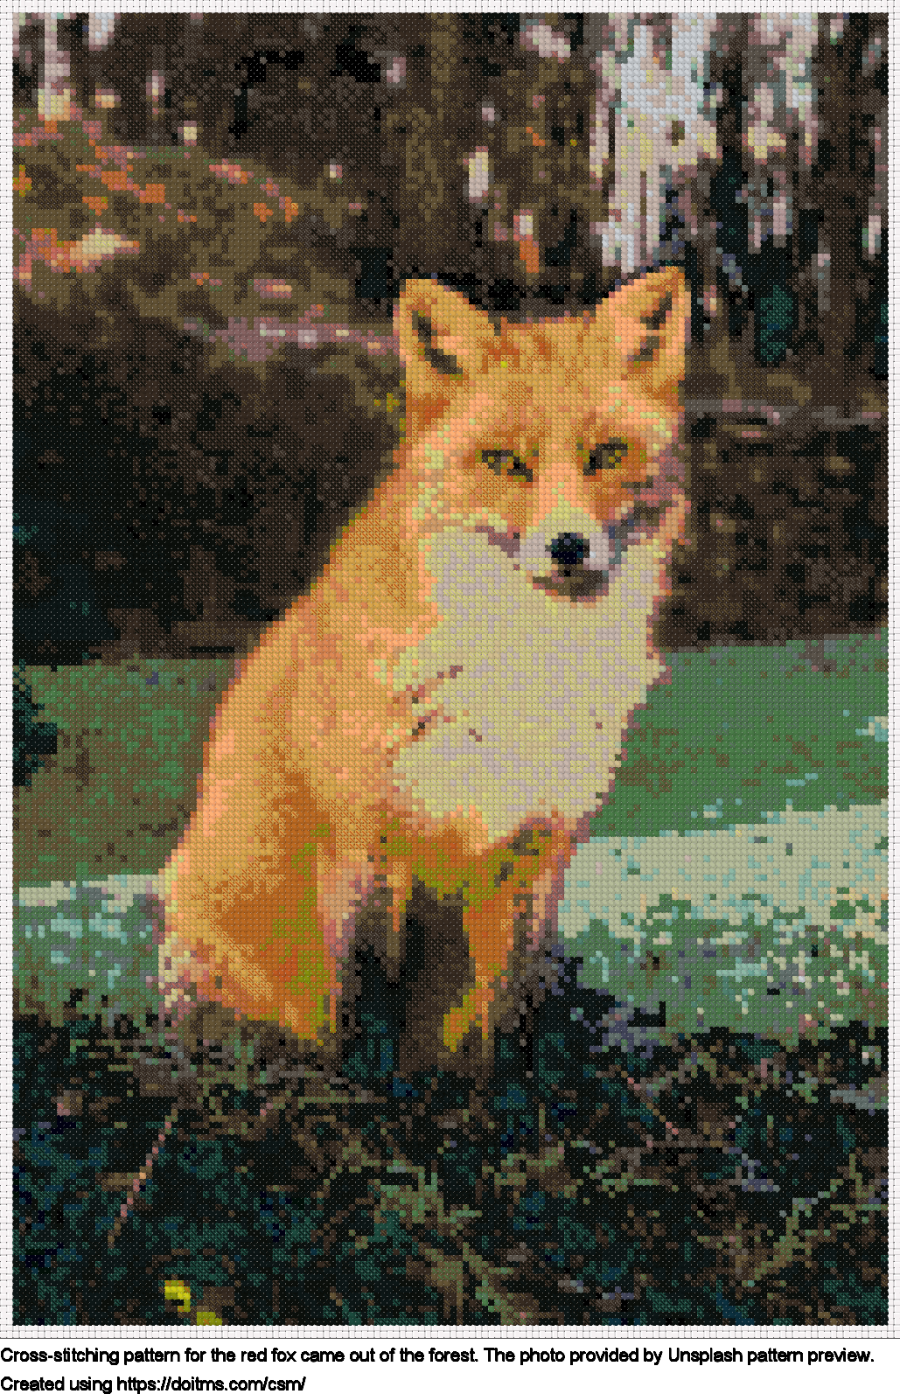 Free The red fox came out of the forest cross-stitching design